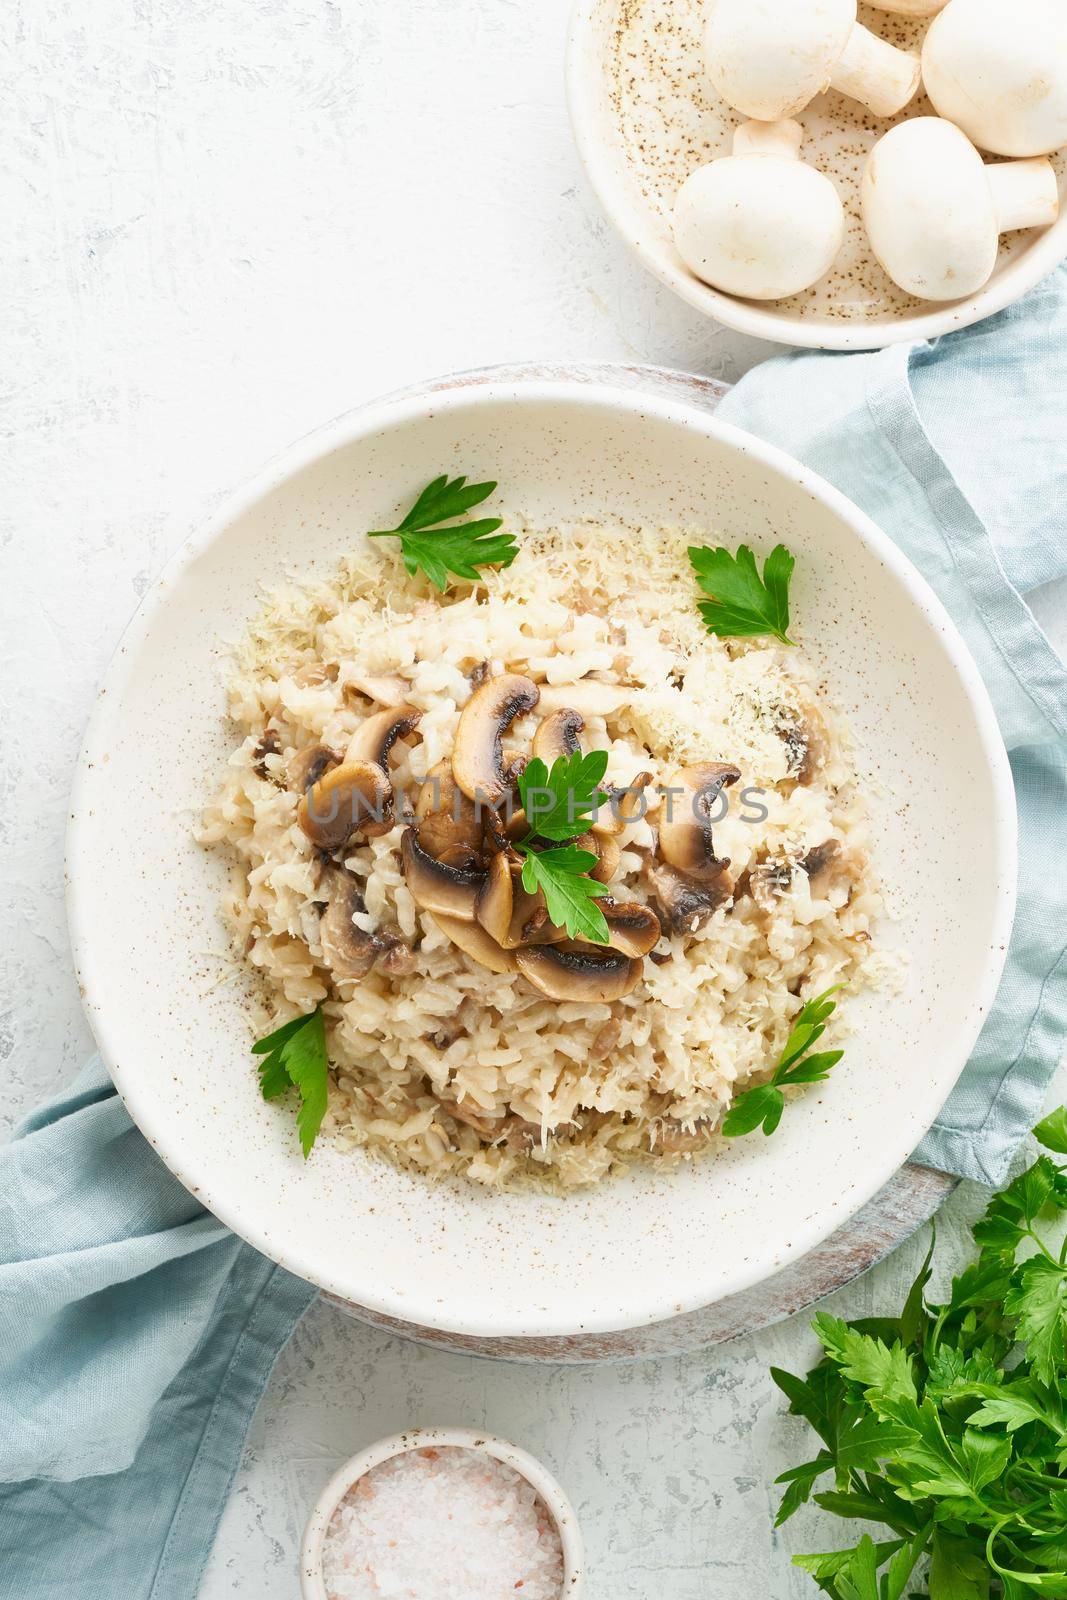 Risotto with mushrooms in plate. Rice porridge with mushrooms and parsley. White table, spoons, mushrooms. Hot dish, italian cuisine, top view, vertical